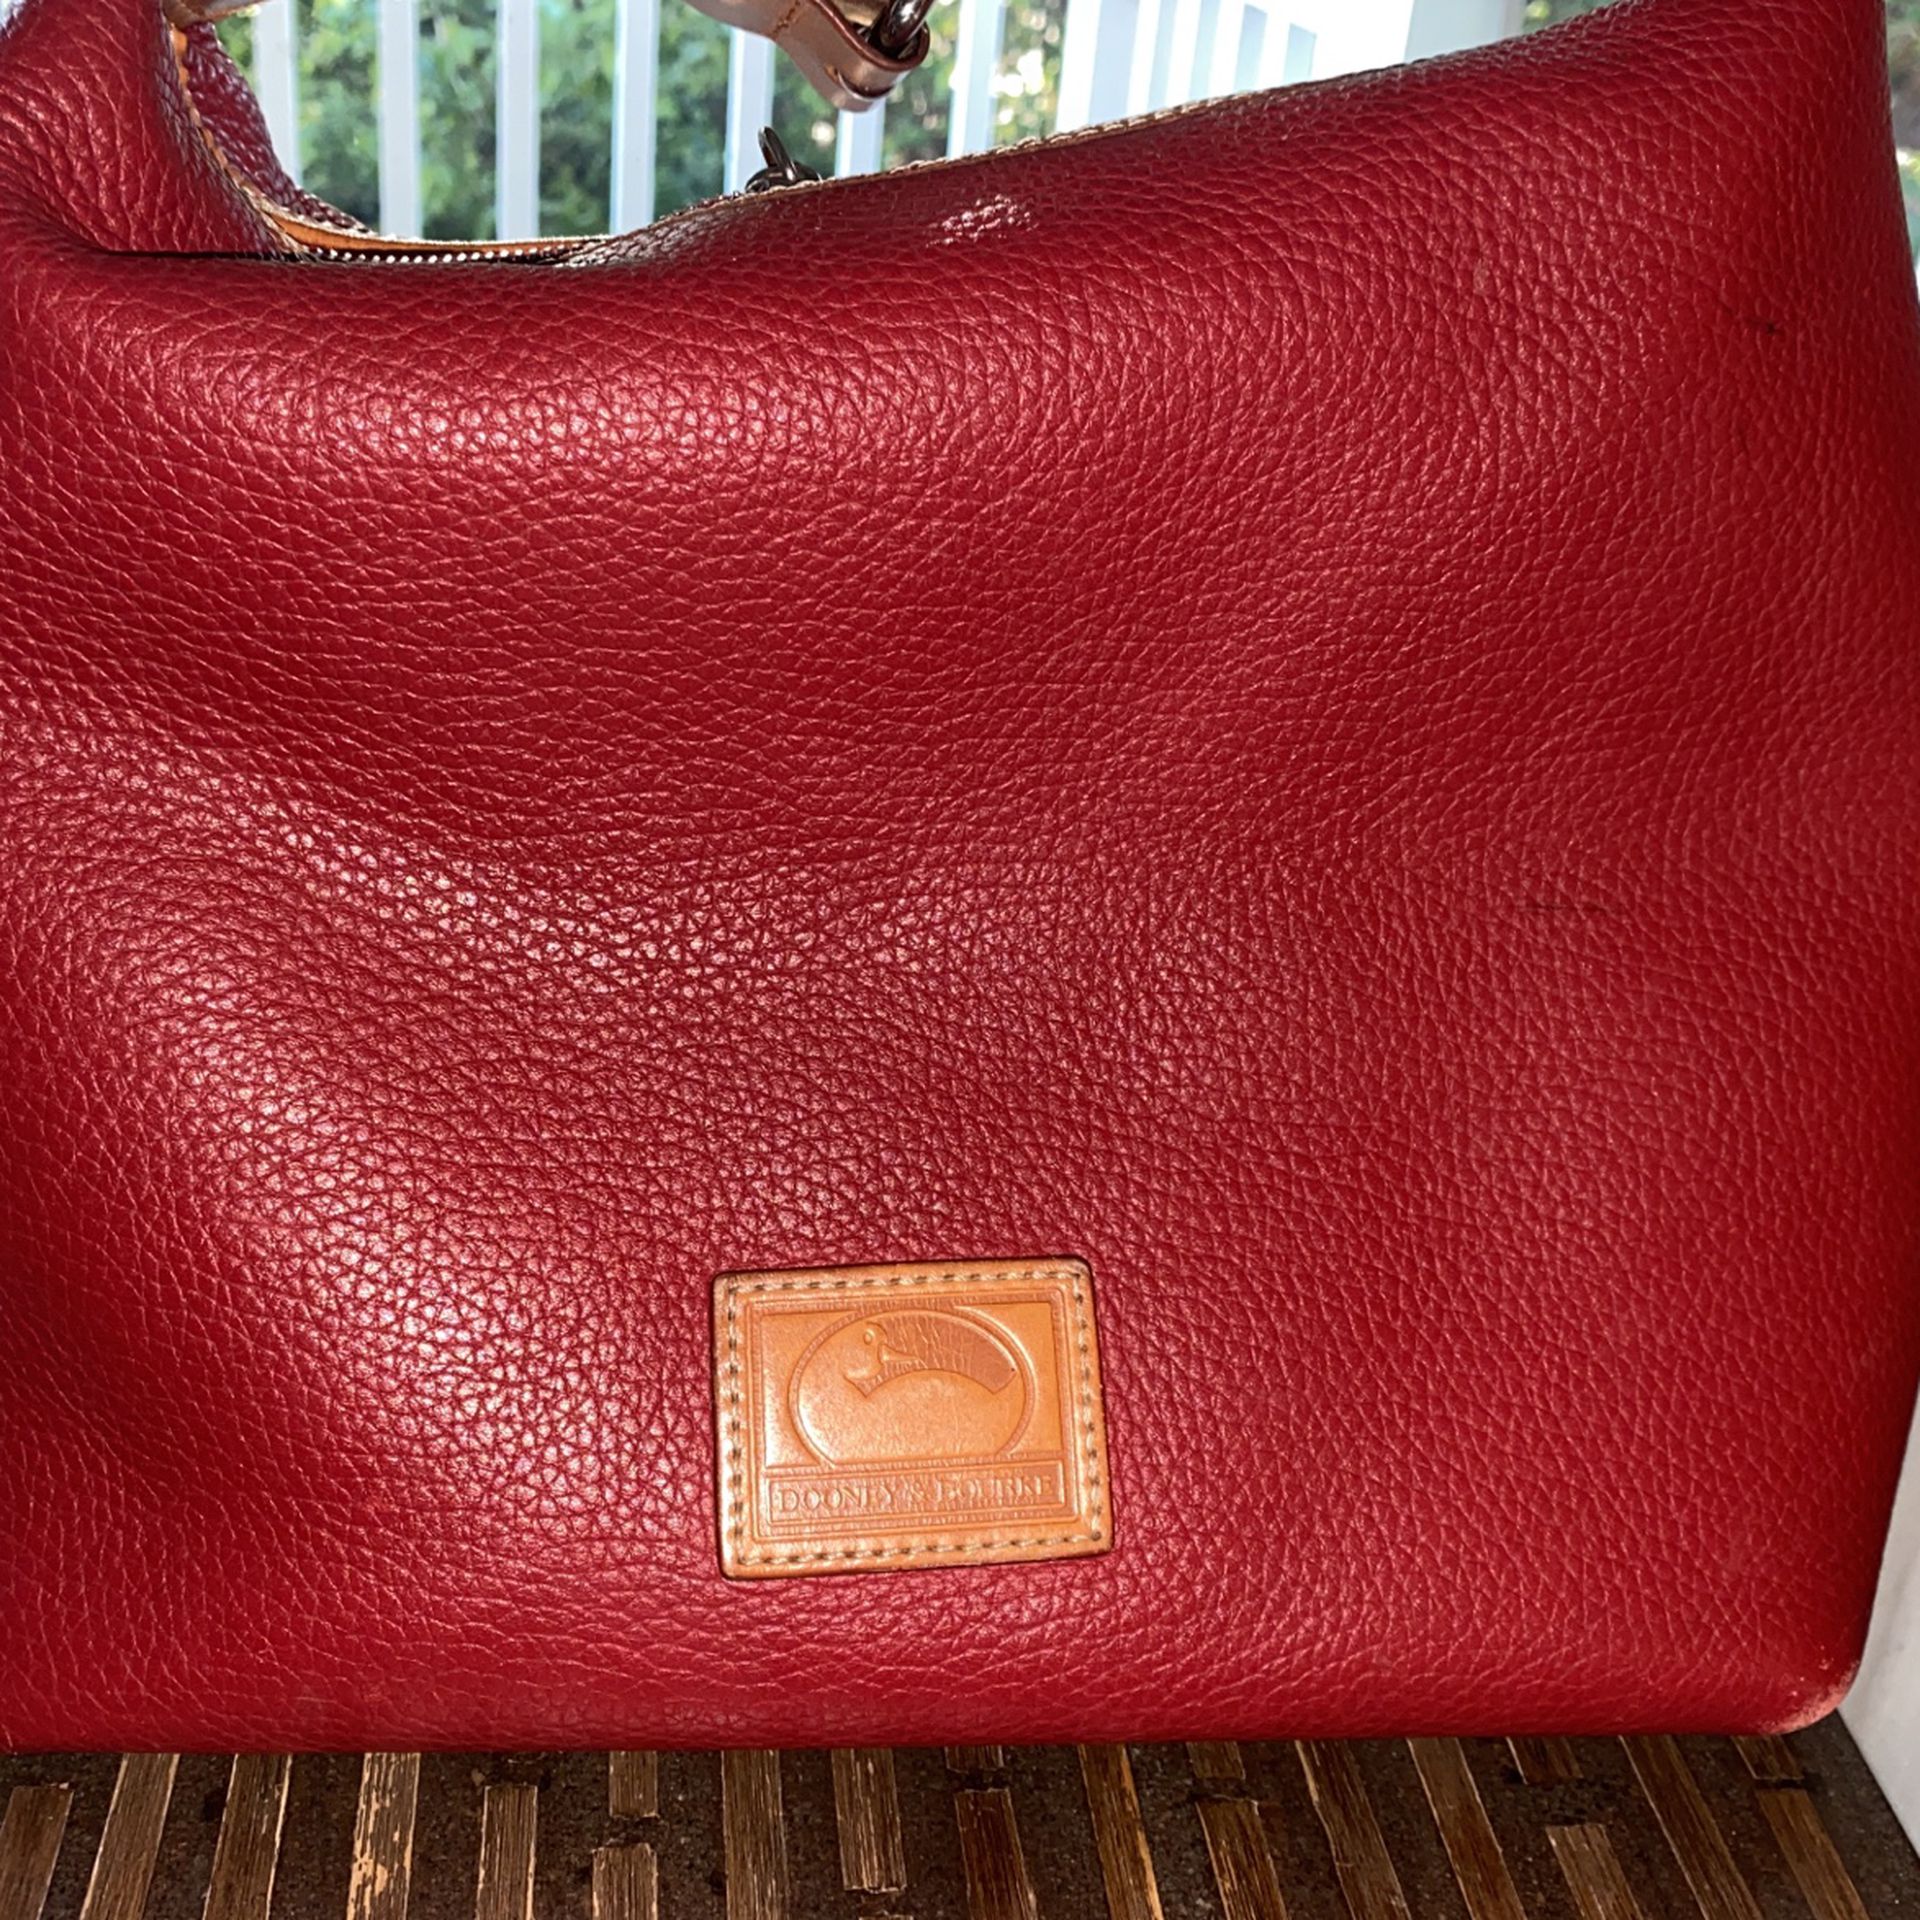 Dooney and Bourke Red Purse